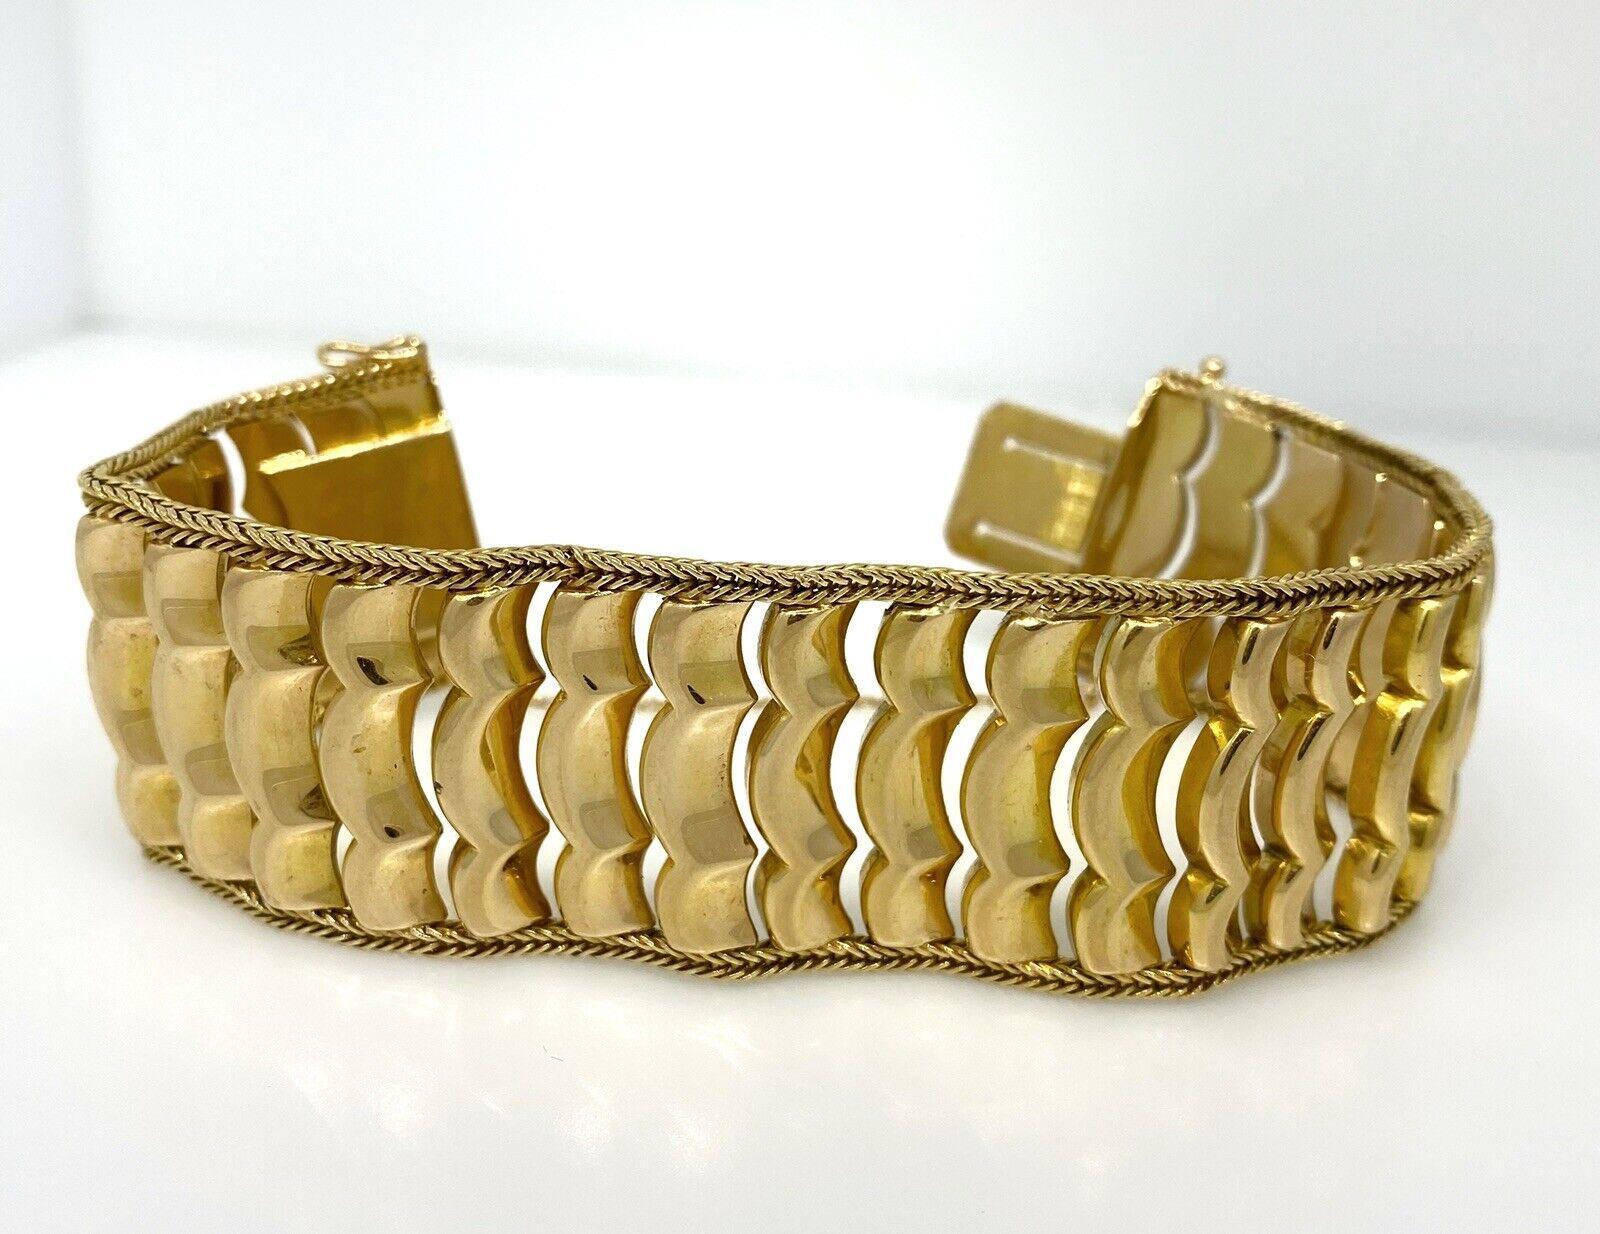 French Vintage Wave Motif Openwork Wide Bracelet in 18k Yellow Gold

Vintage Wave Motif Vintage Bracelet features wide Wave Links in high-polished gold edged with a wheat-style chain, all in 18k Yellow Gold by a French maker. The bracelet is secured